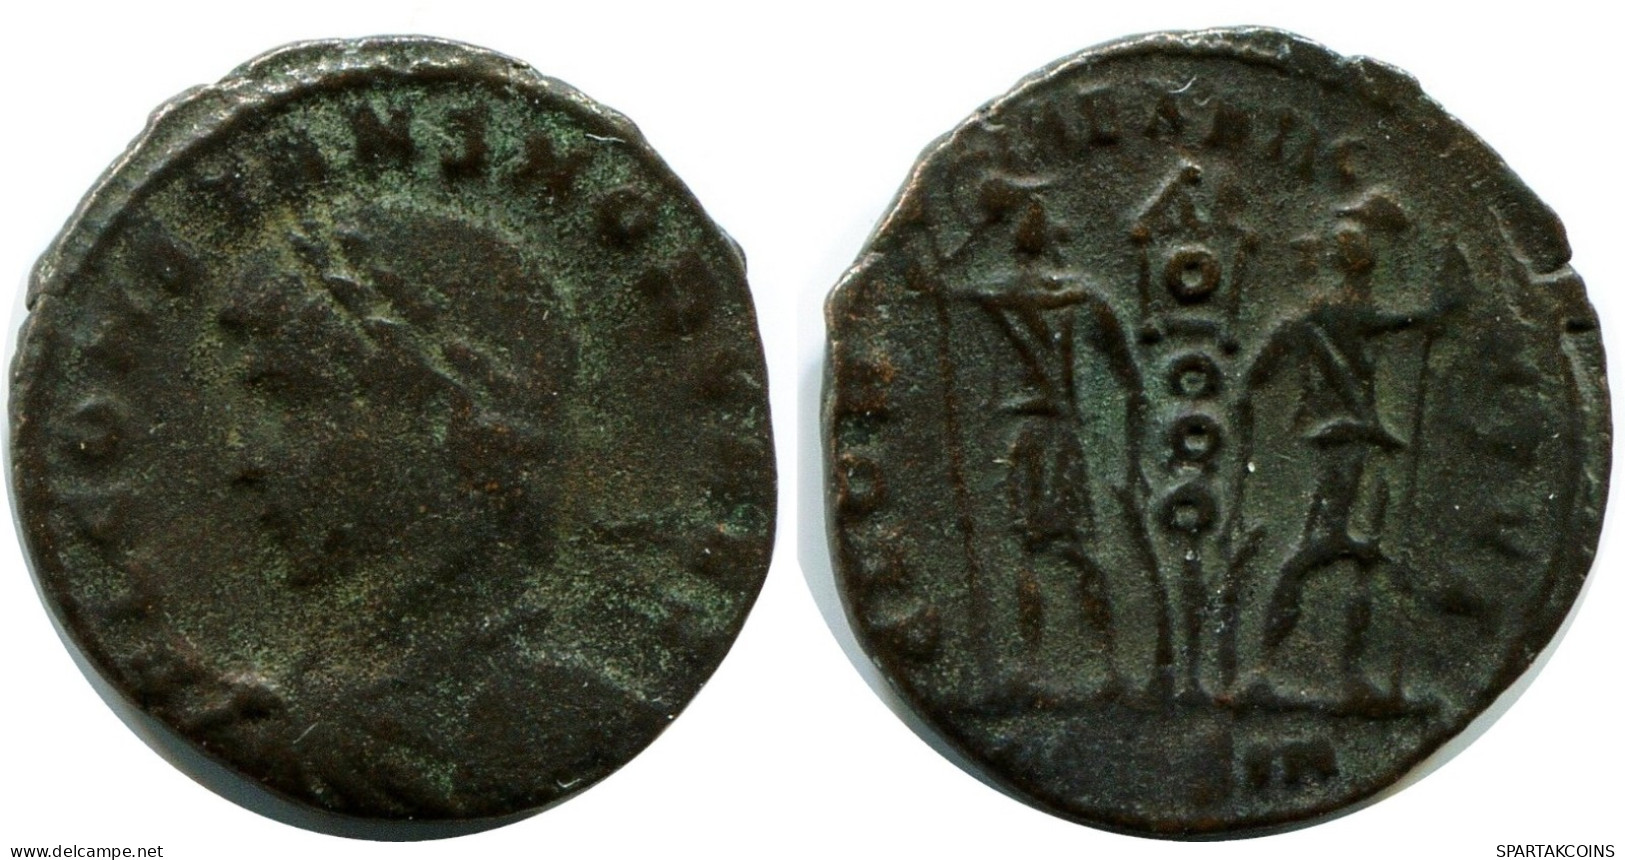 CONSTANS MINTED IN CONSTANTINOPLE FOUND IN IHNASYAH HOARD EGYPT #ANC11958.14.D.A - The Christian Empire (307 AD To 363 AD)